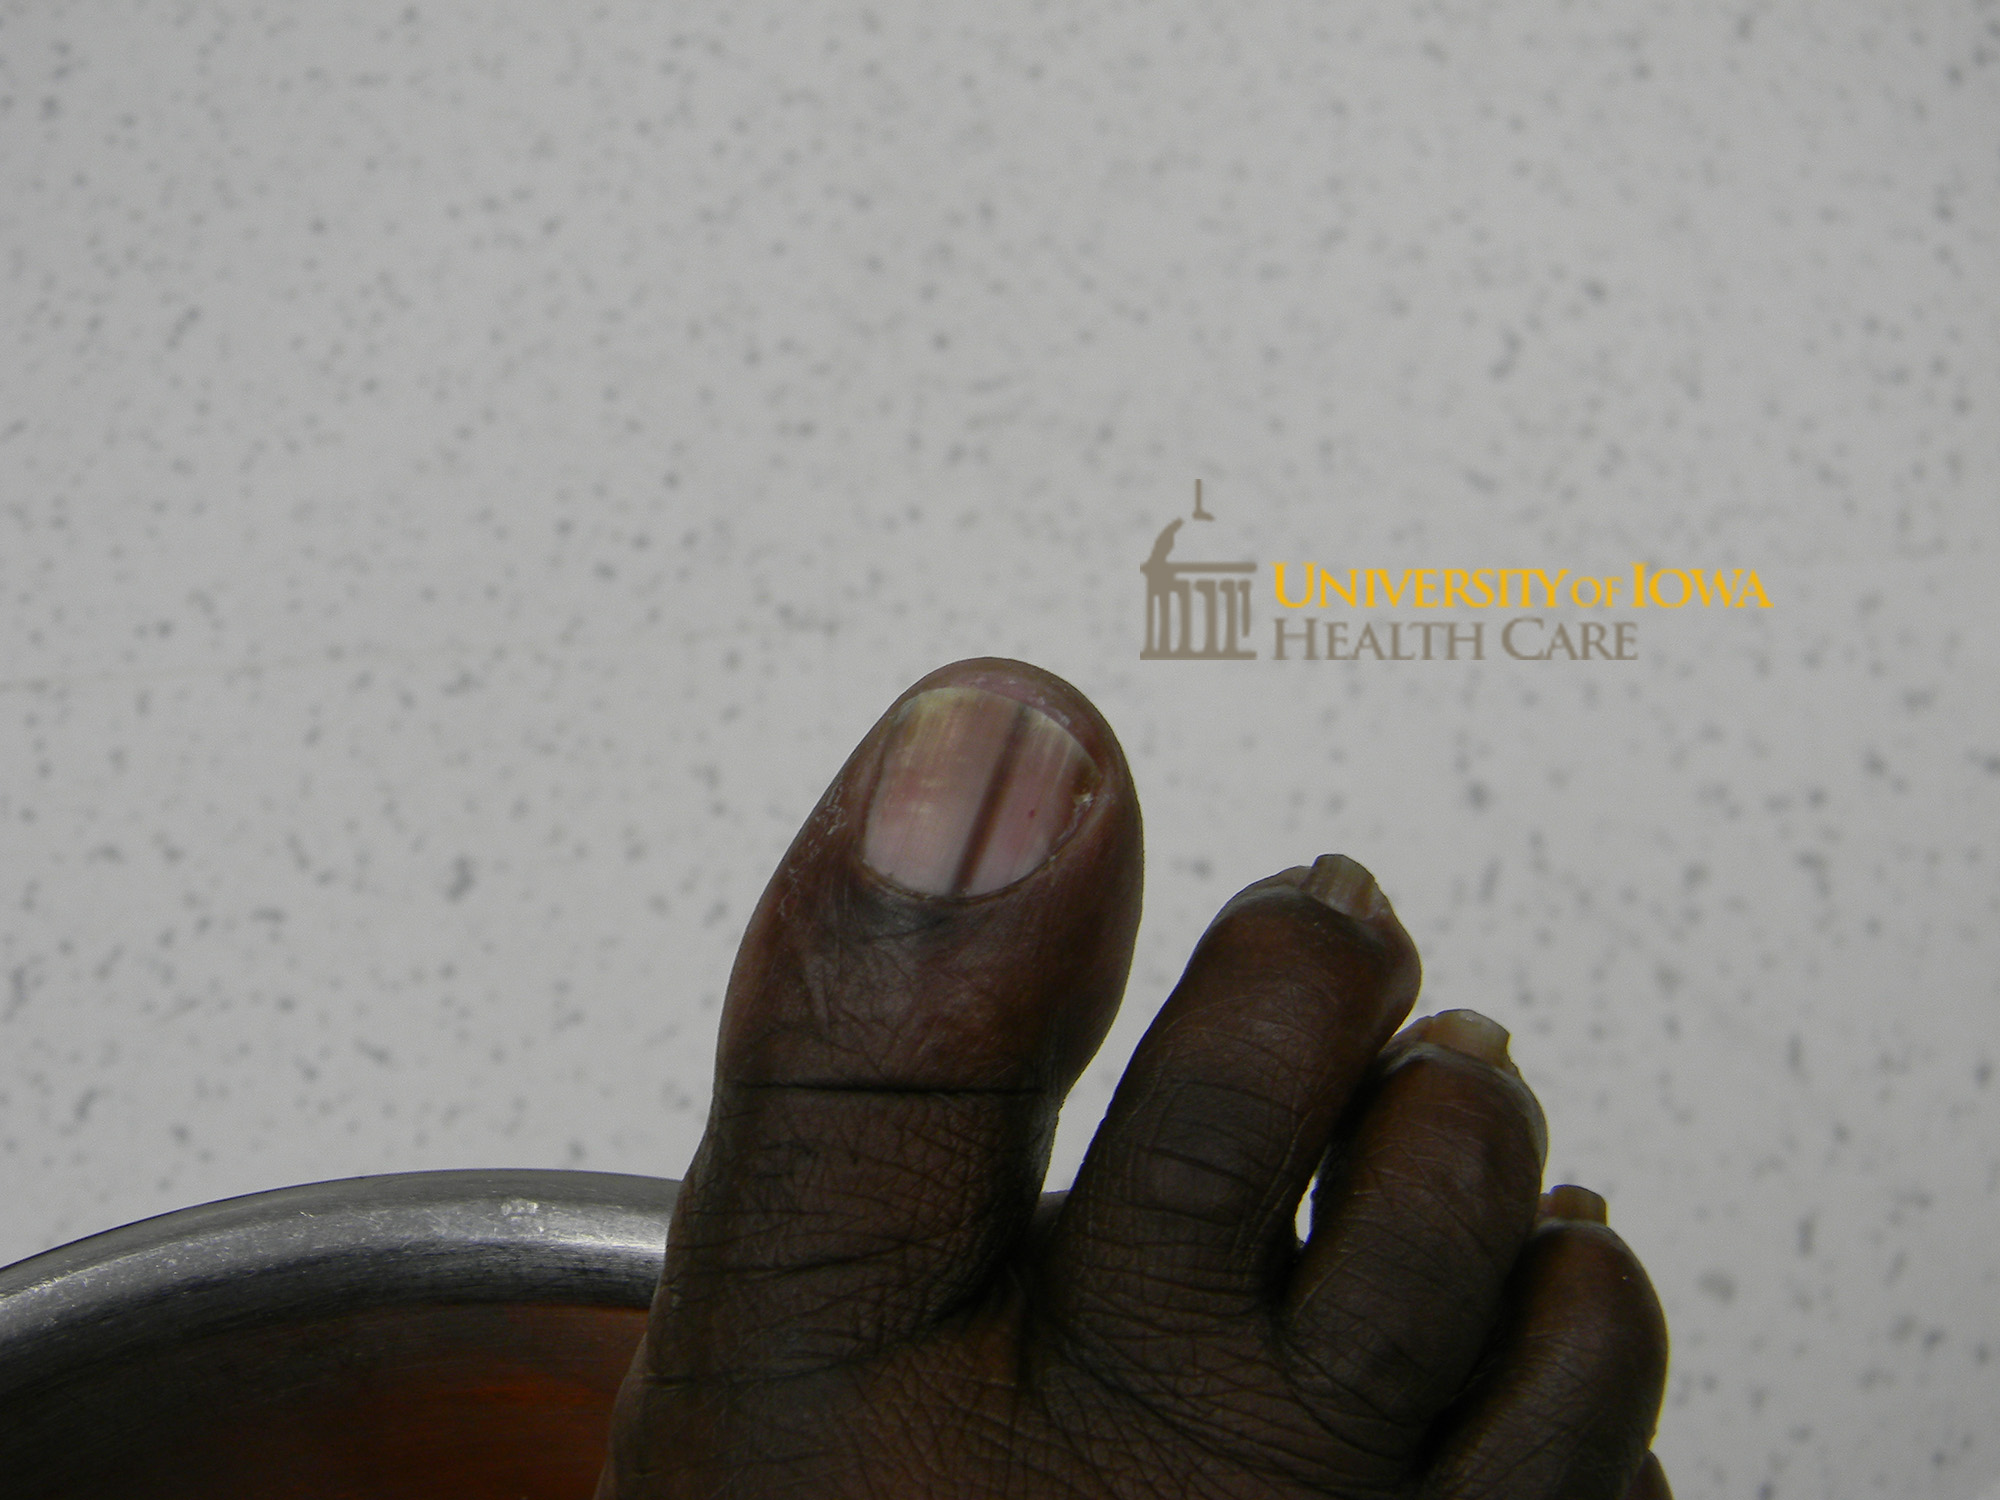 Longitudinal brown band on the toenail. (click images for higher resolution).